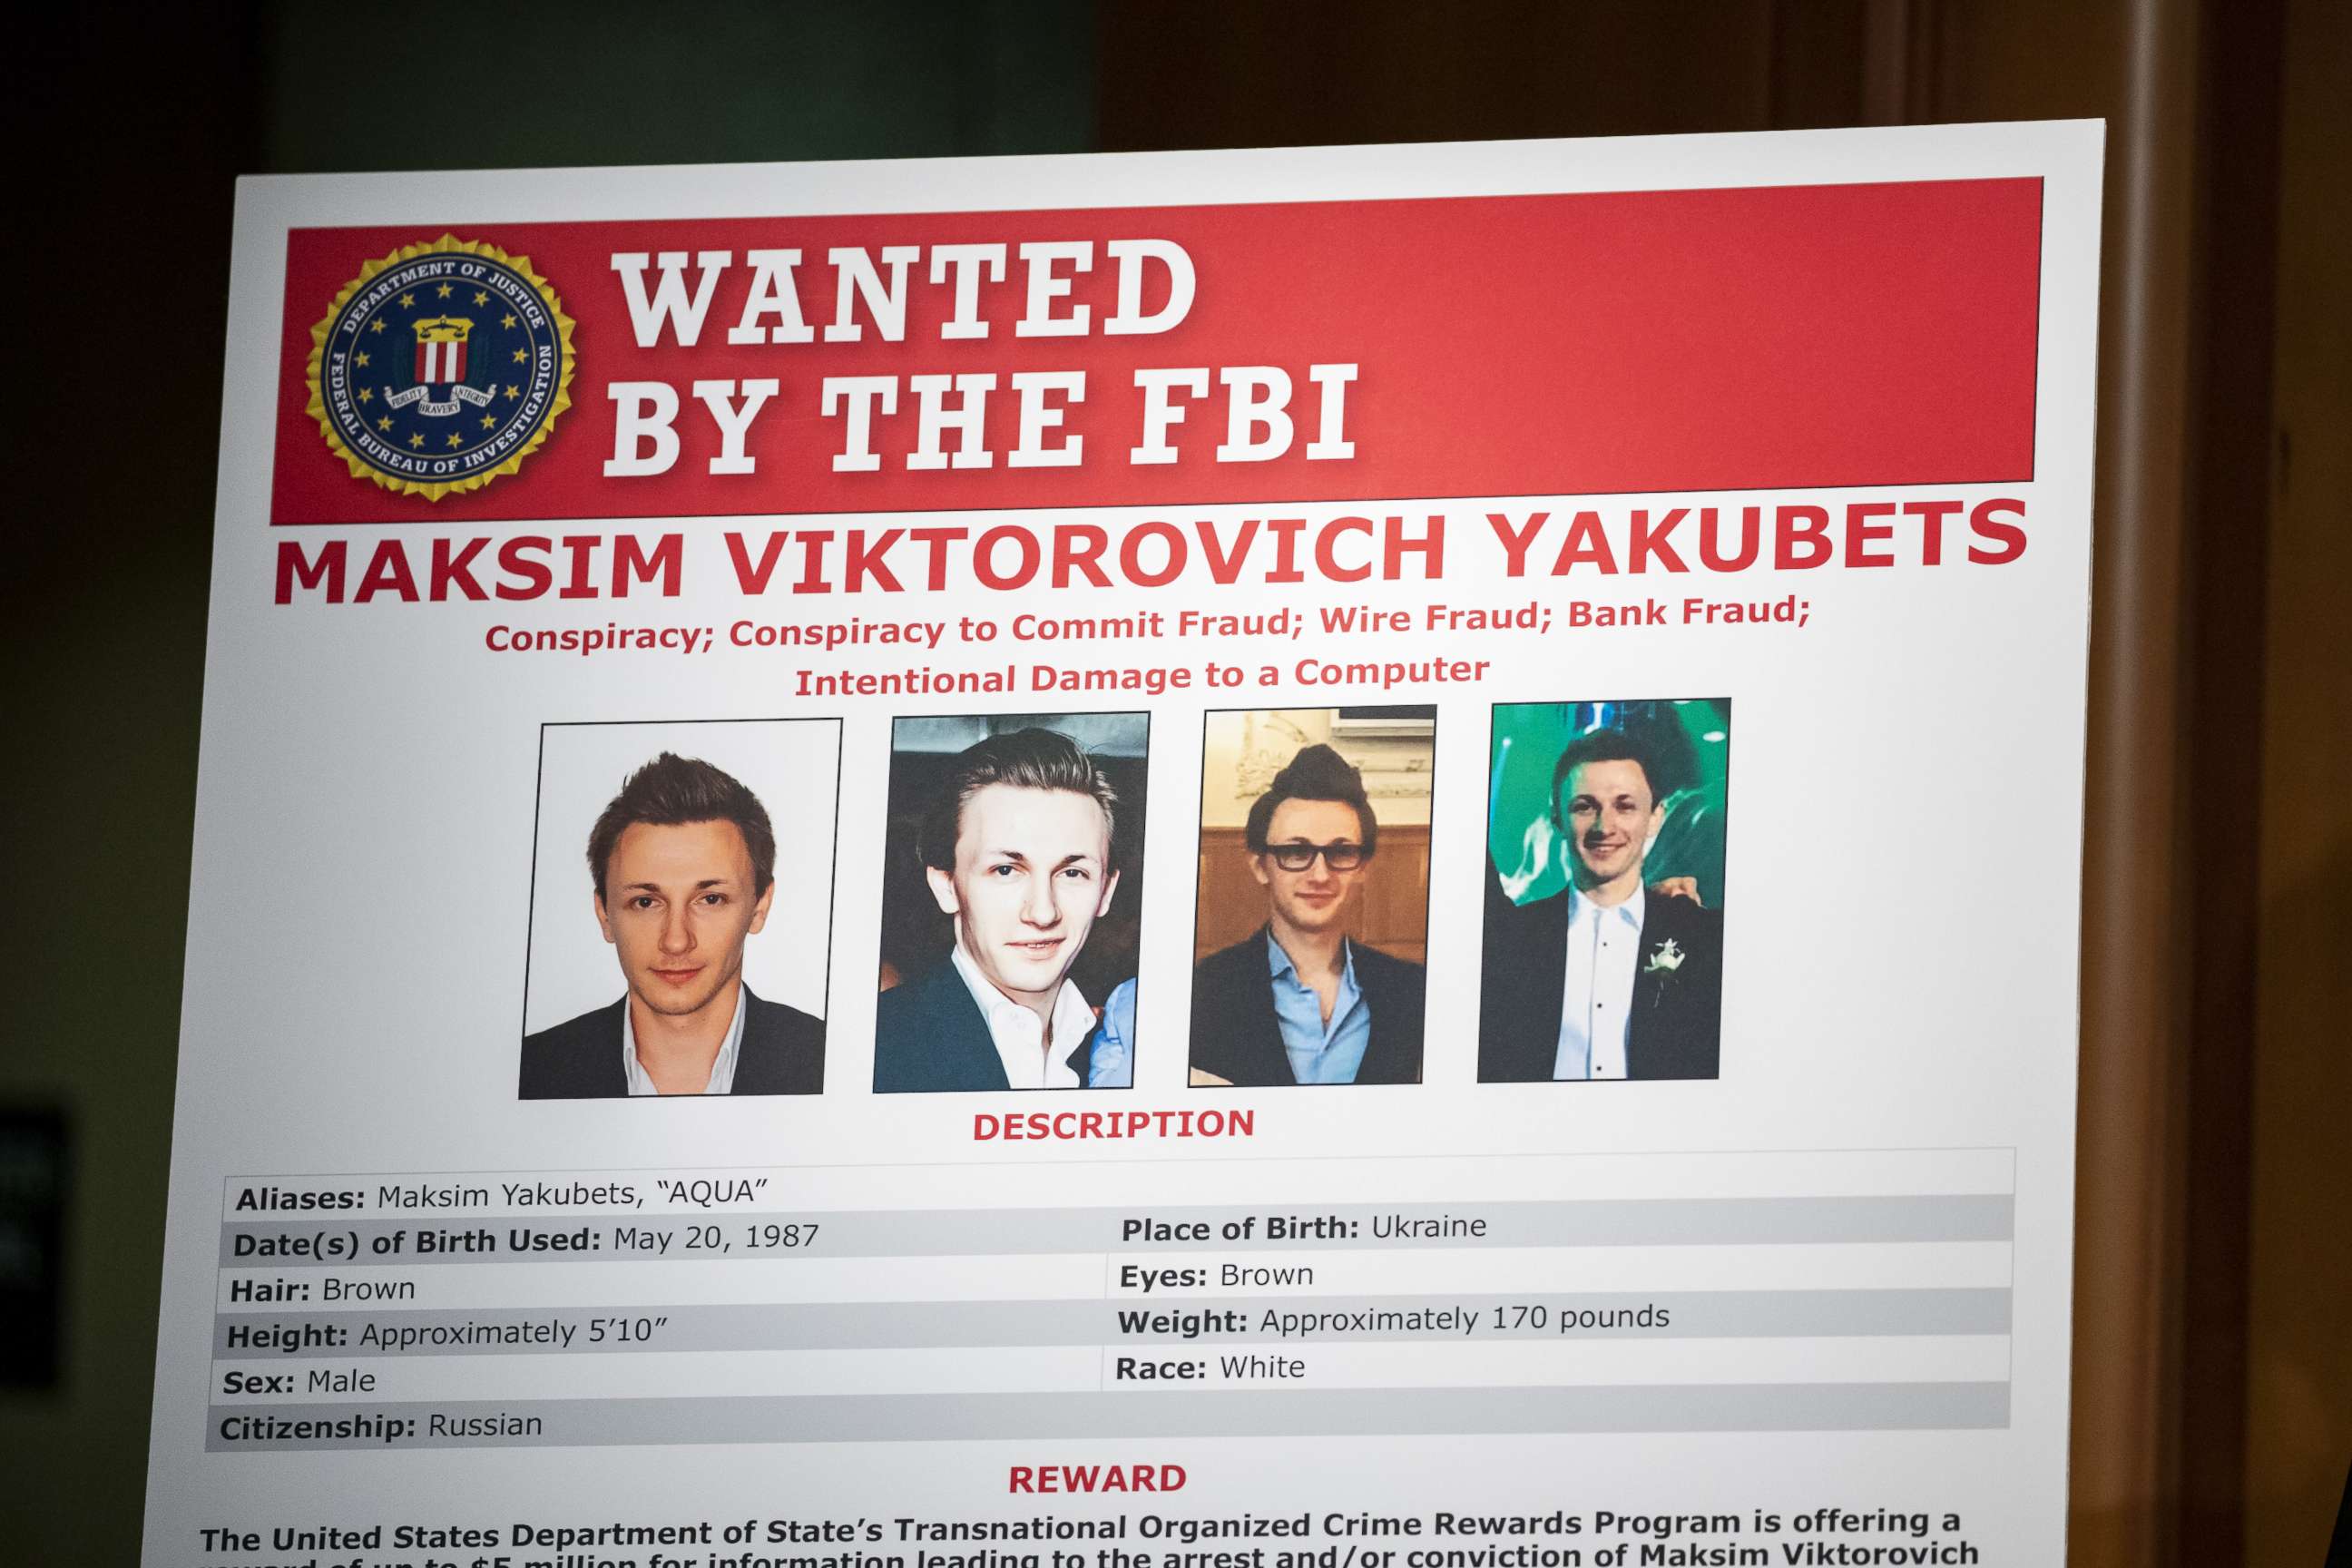 PHOTO: The wanted poster of Maksim Viktorovich Yakubets is displayed at the U.S. Department of Justice on Dec. 5, 2019 in Washington, D.C.